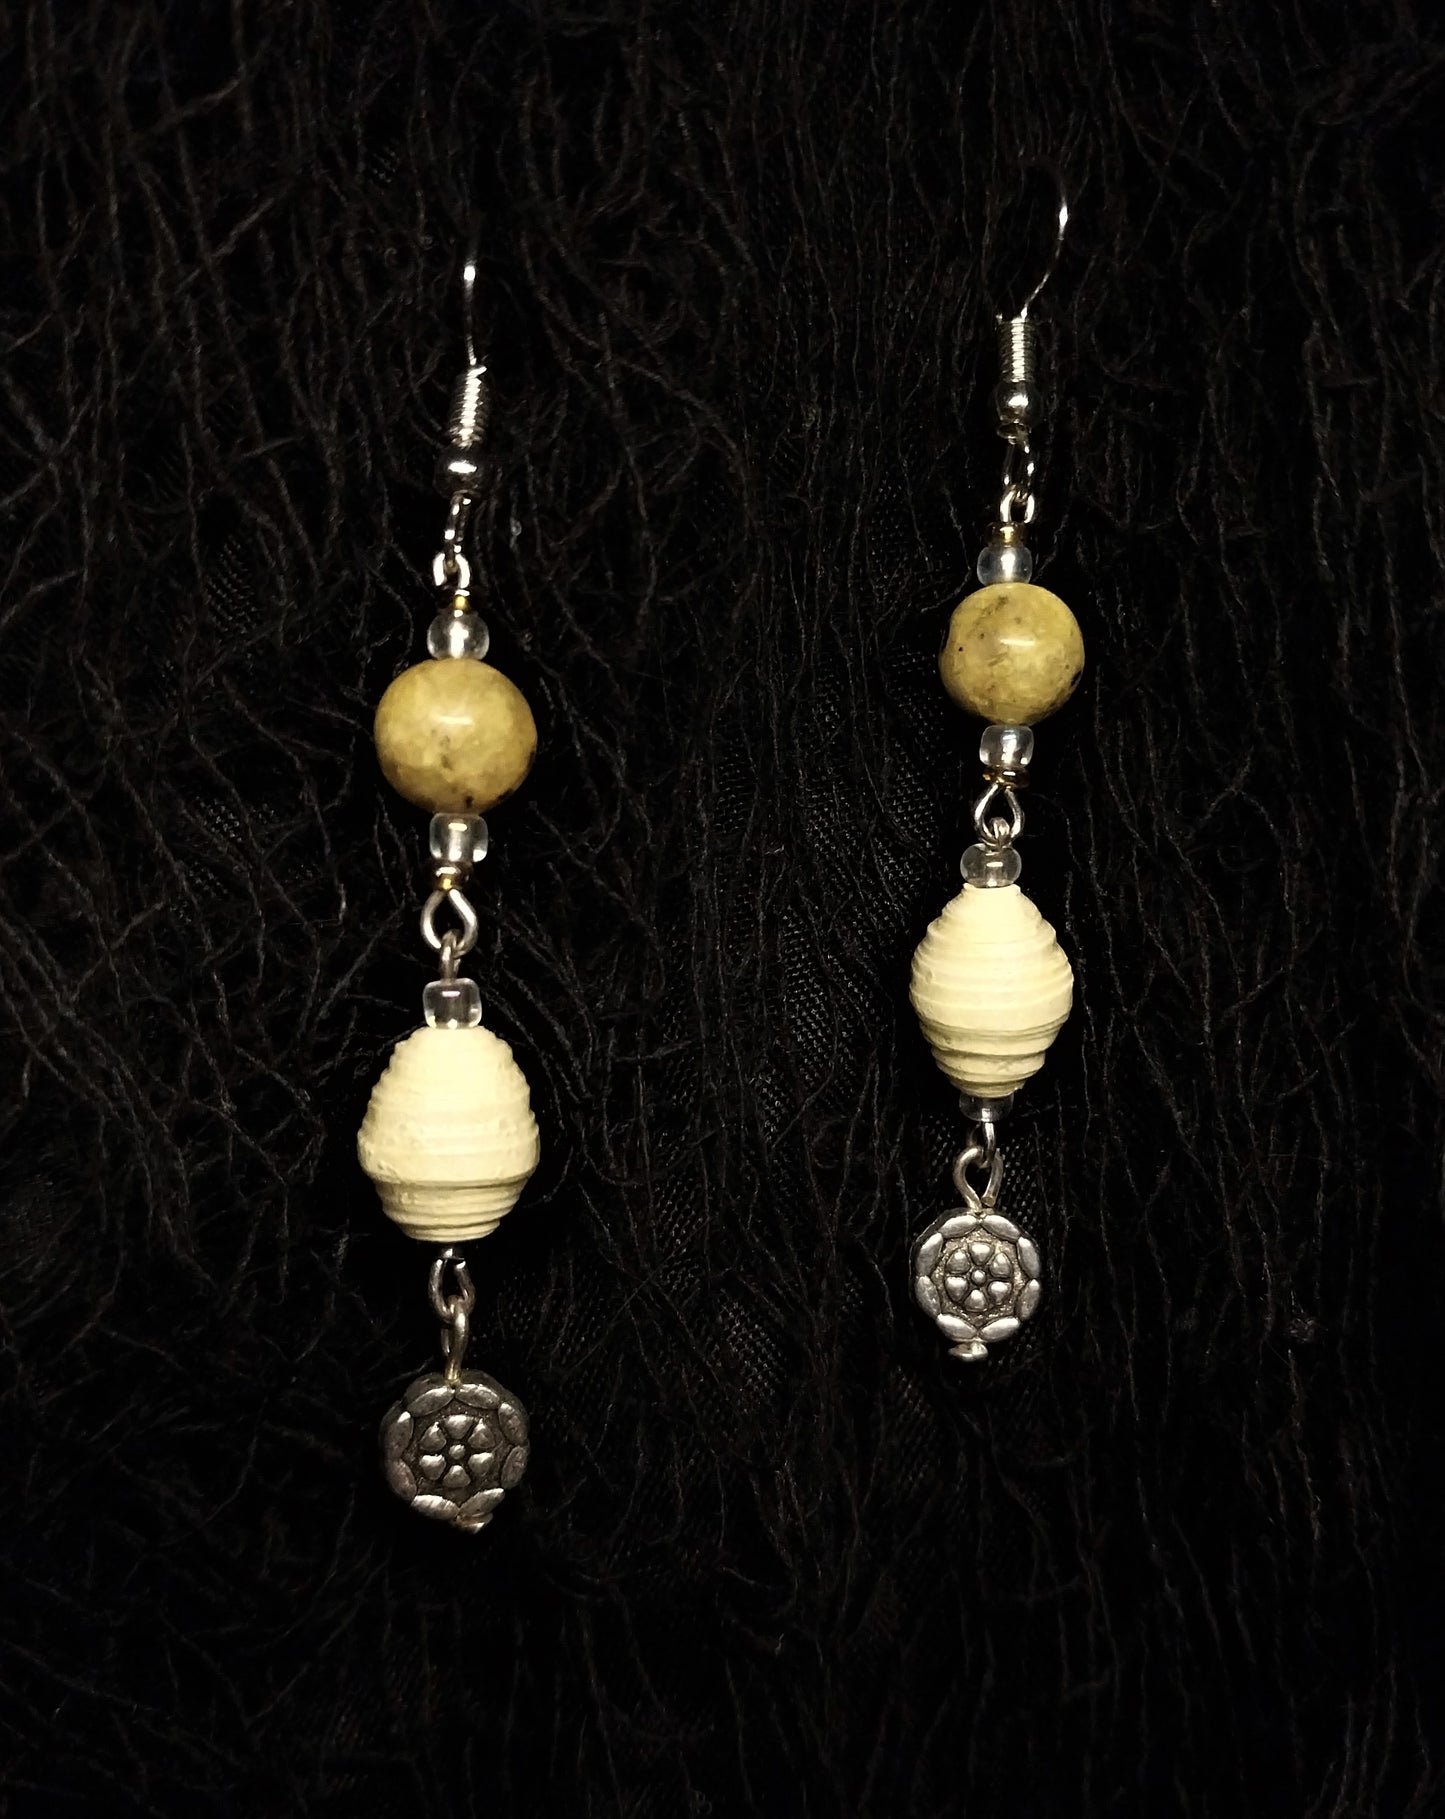 Flower Earrings With Pastel Yellow Handmade Paper Beads